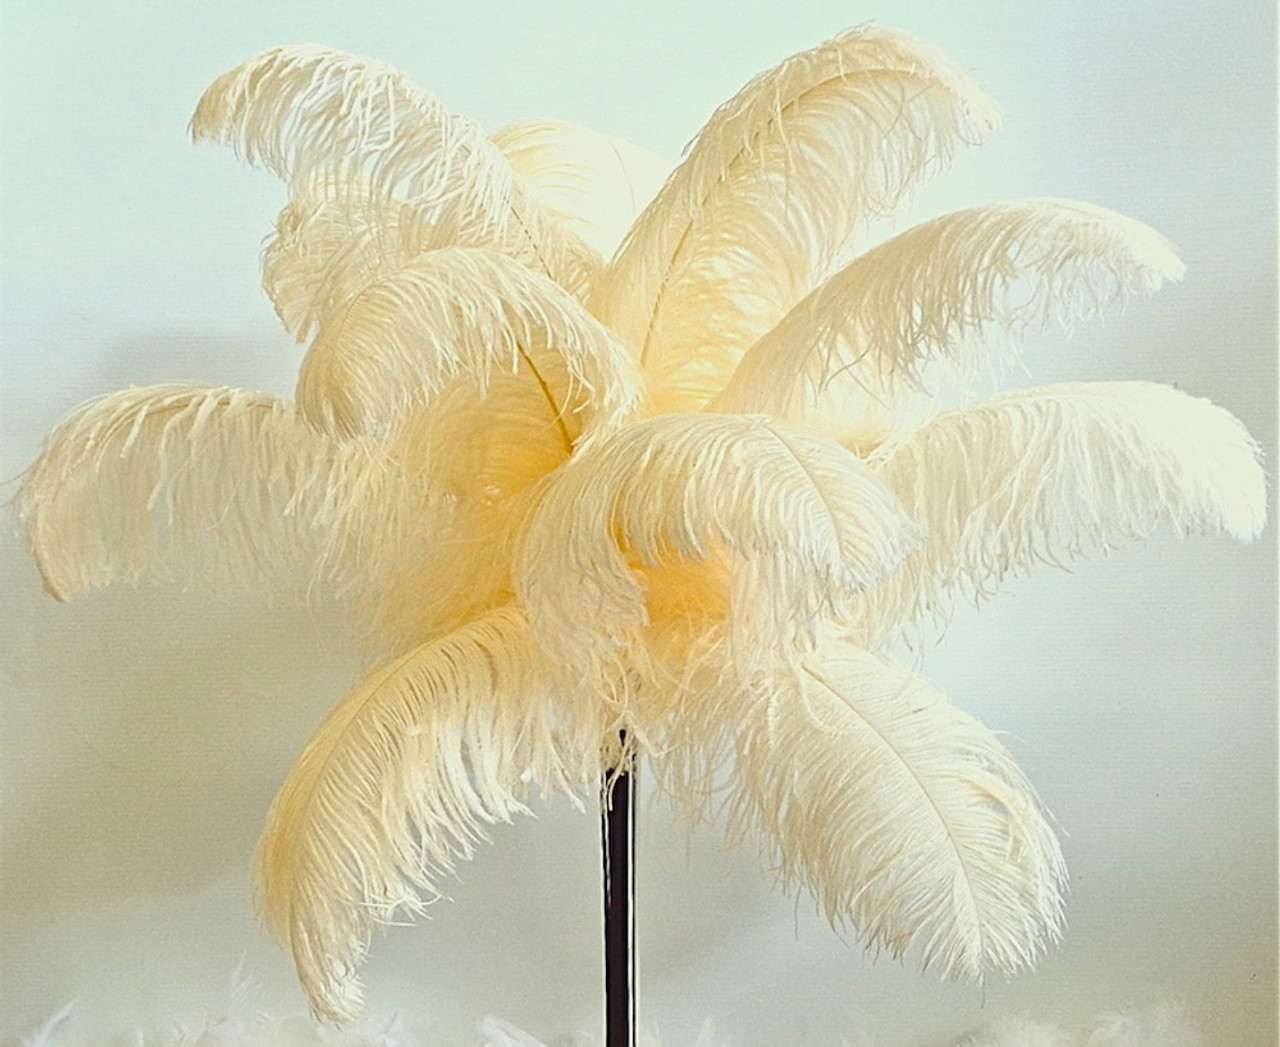 20 inch ostrich feathers